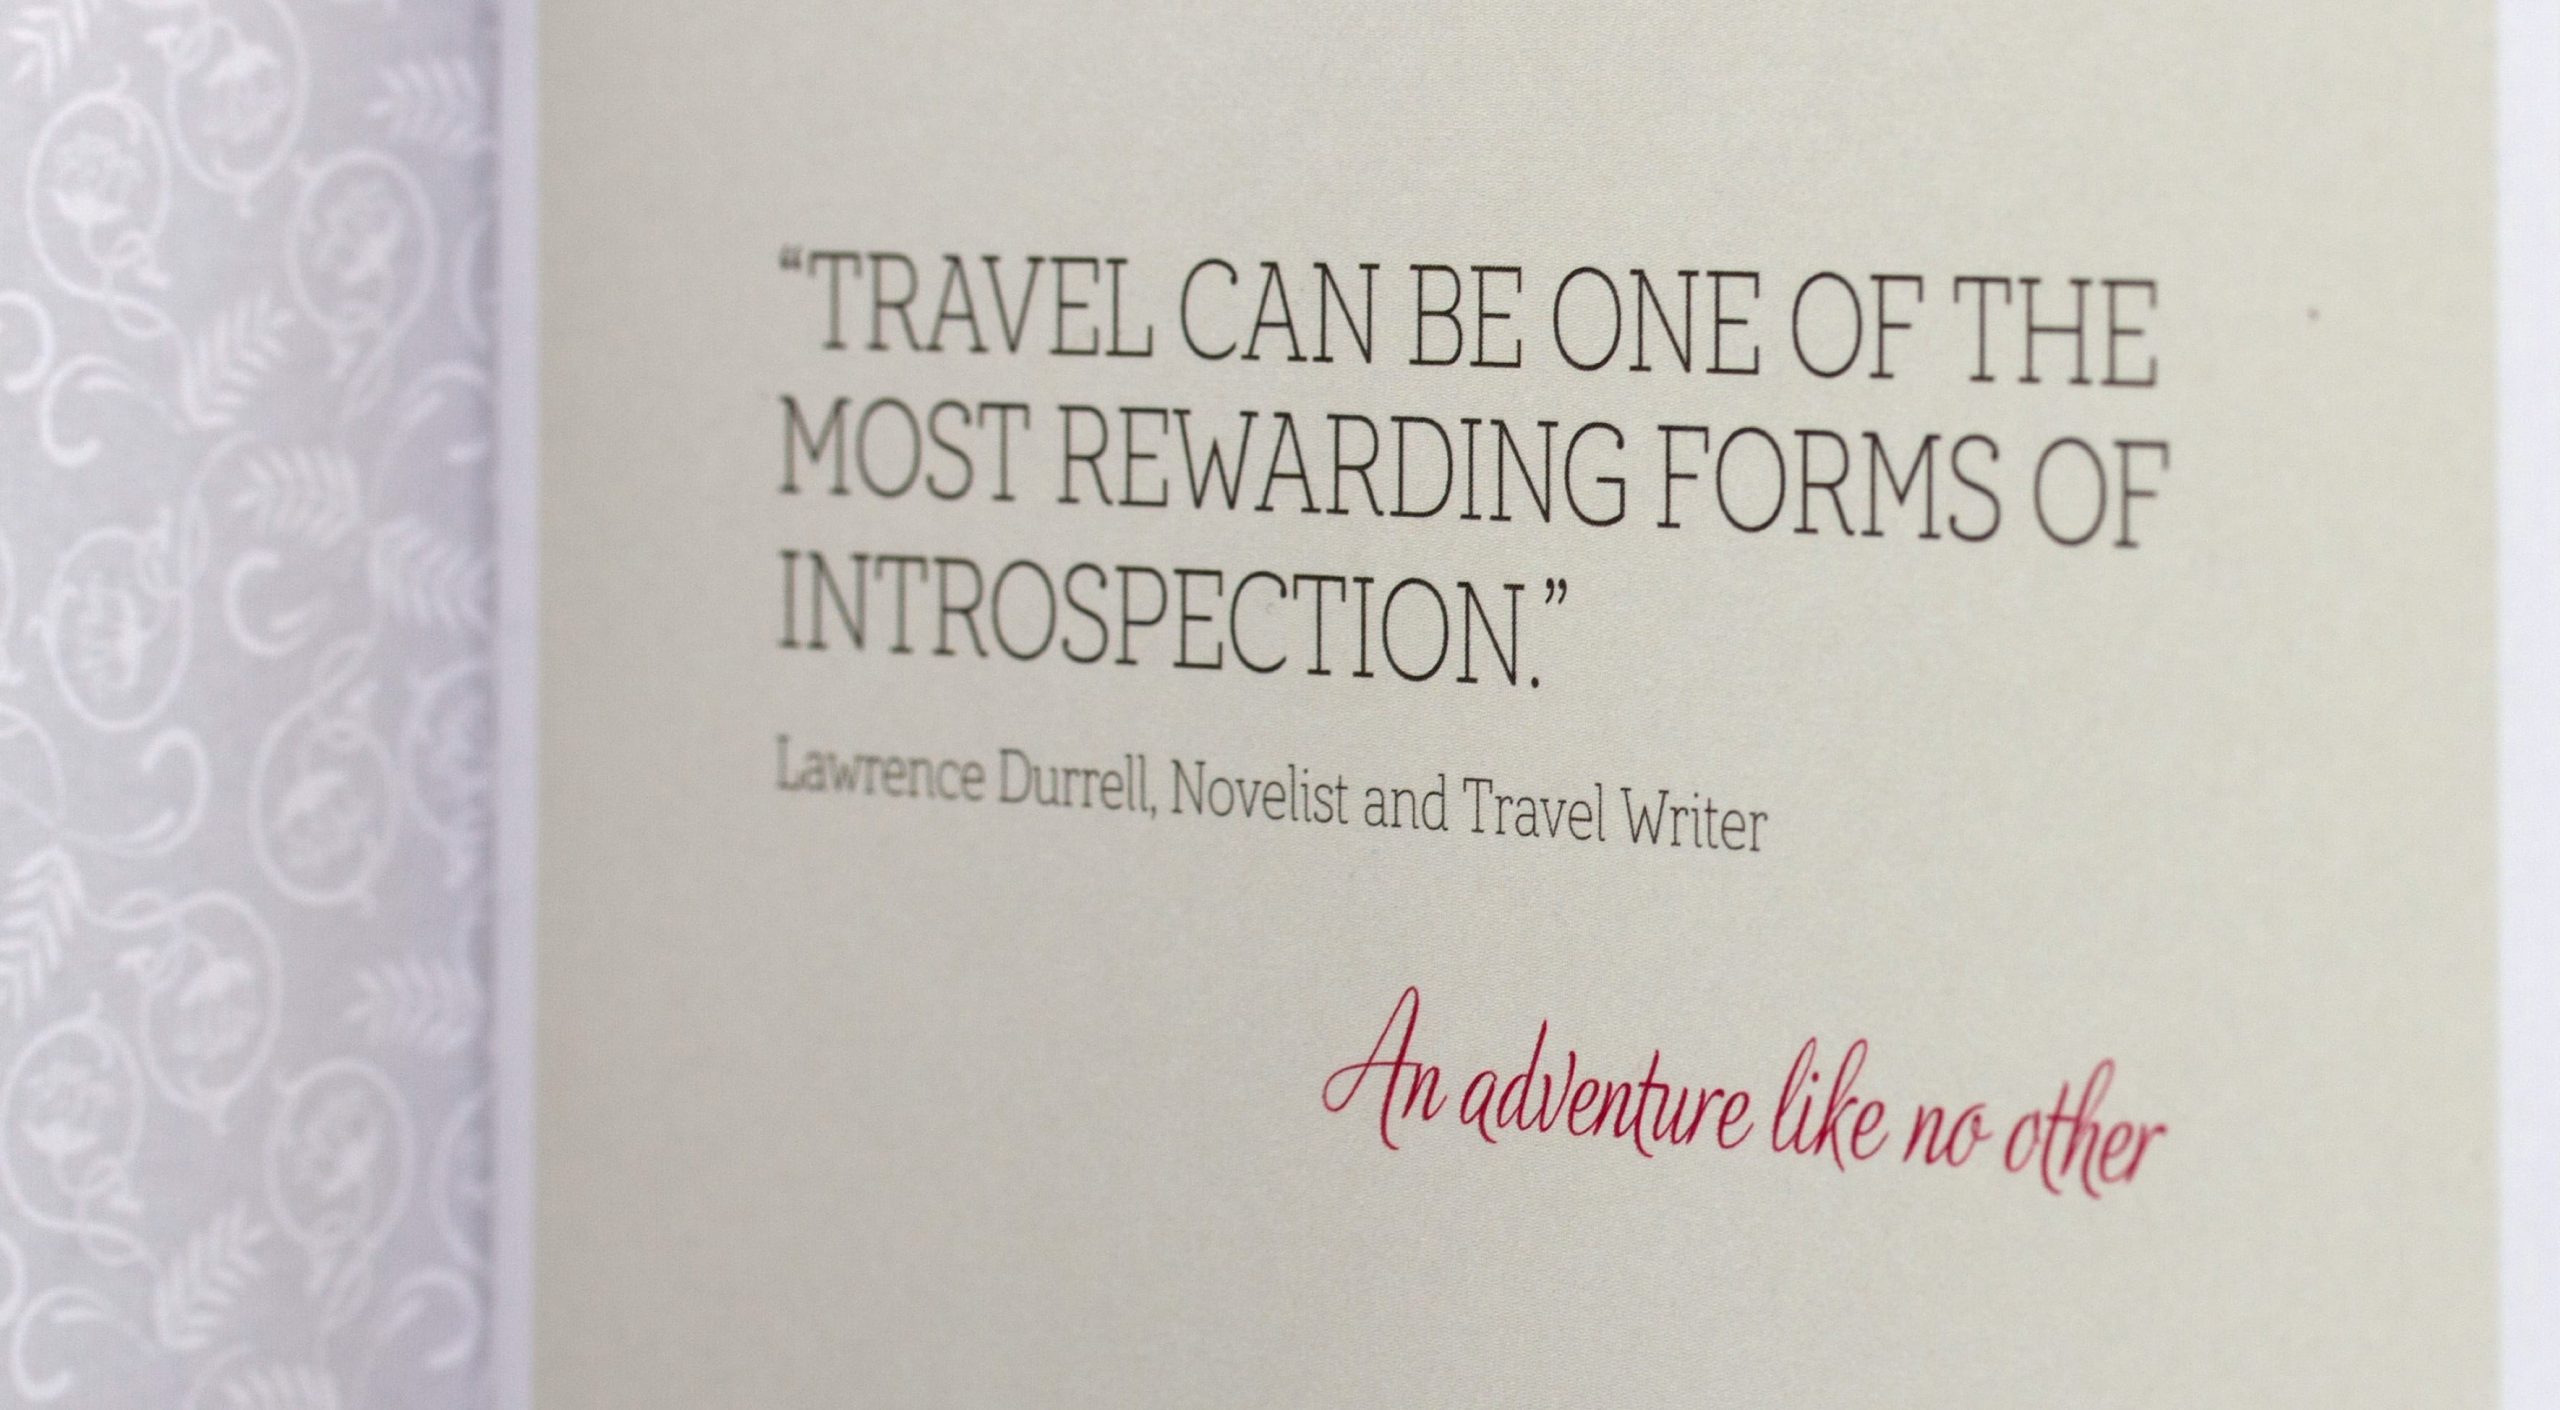 Orient-Express brochure, quote on page "Travel can be one of the most rewarding forms of introspection." Lawrence Durrell, An adventure like no other